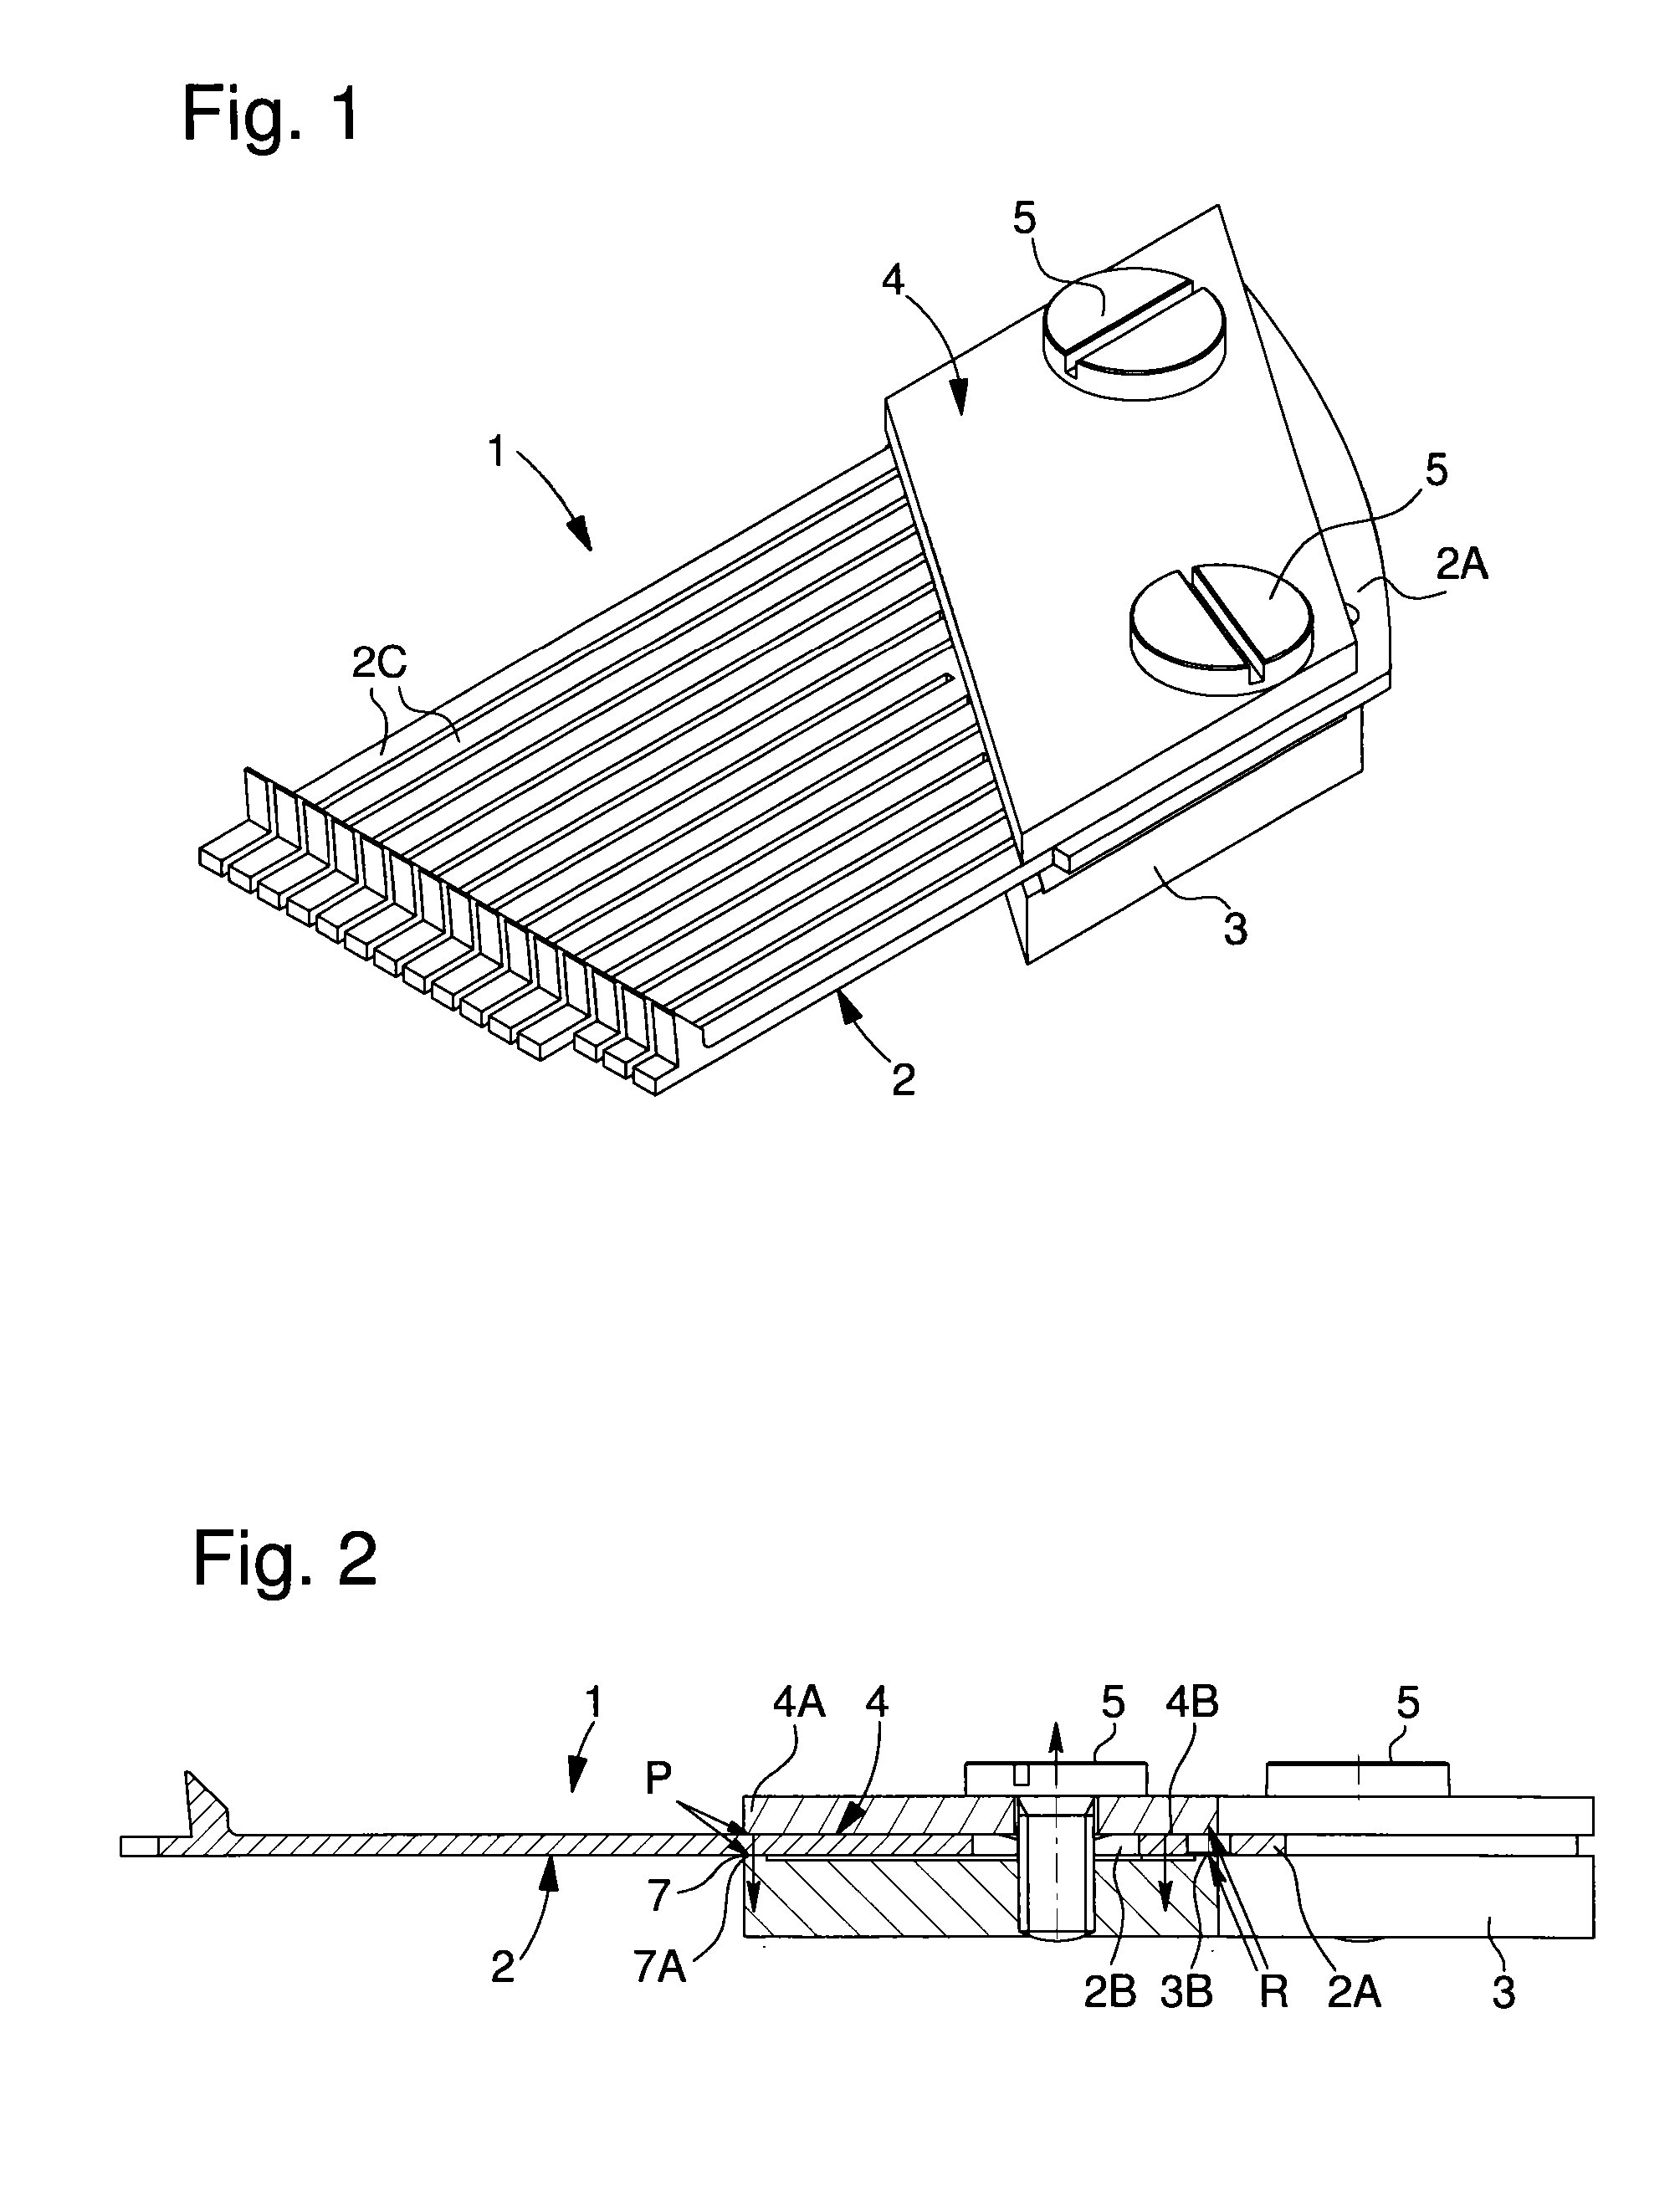 Method for adjusting the vibration frequency range of a sound producing device with vibrating tongues